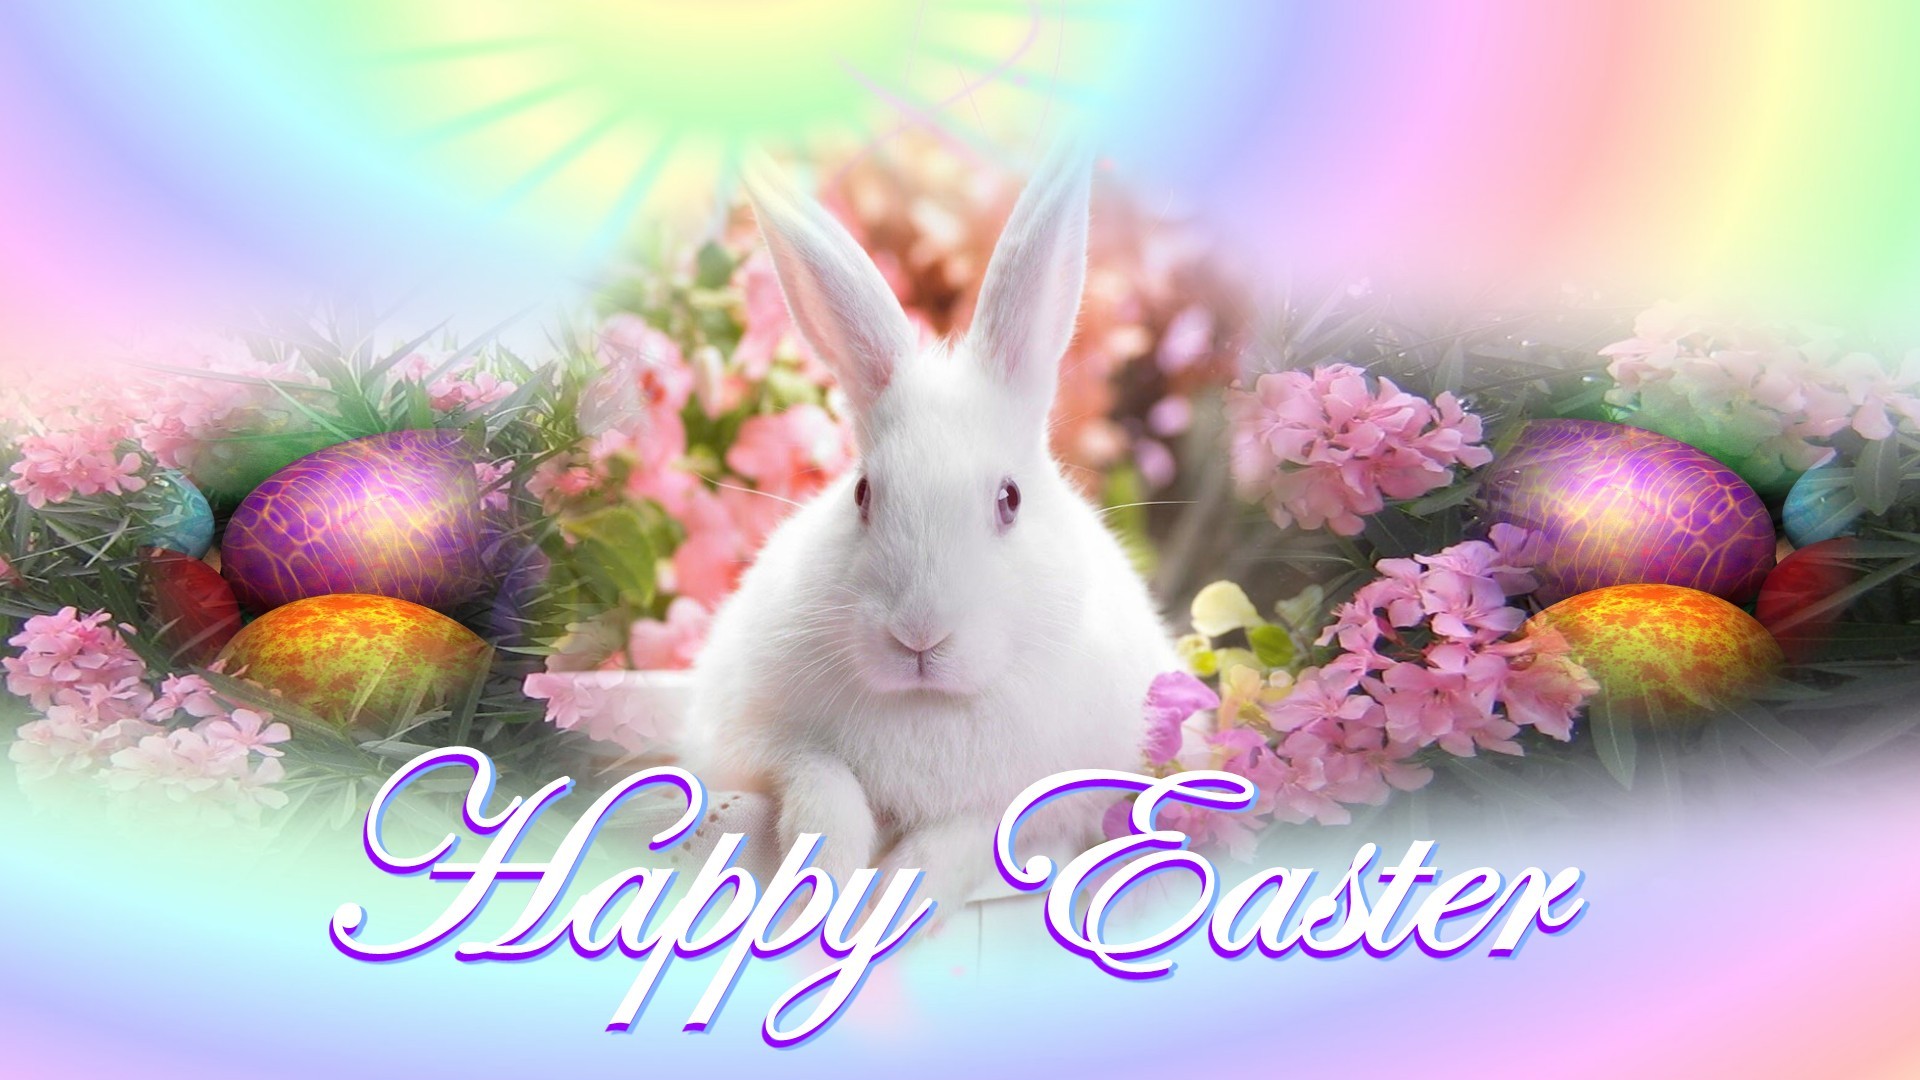 http://theartmad.com/wp-content/uploads/2015/03/Happy-Easter-Monday-22.jpg